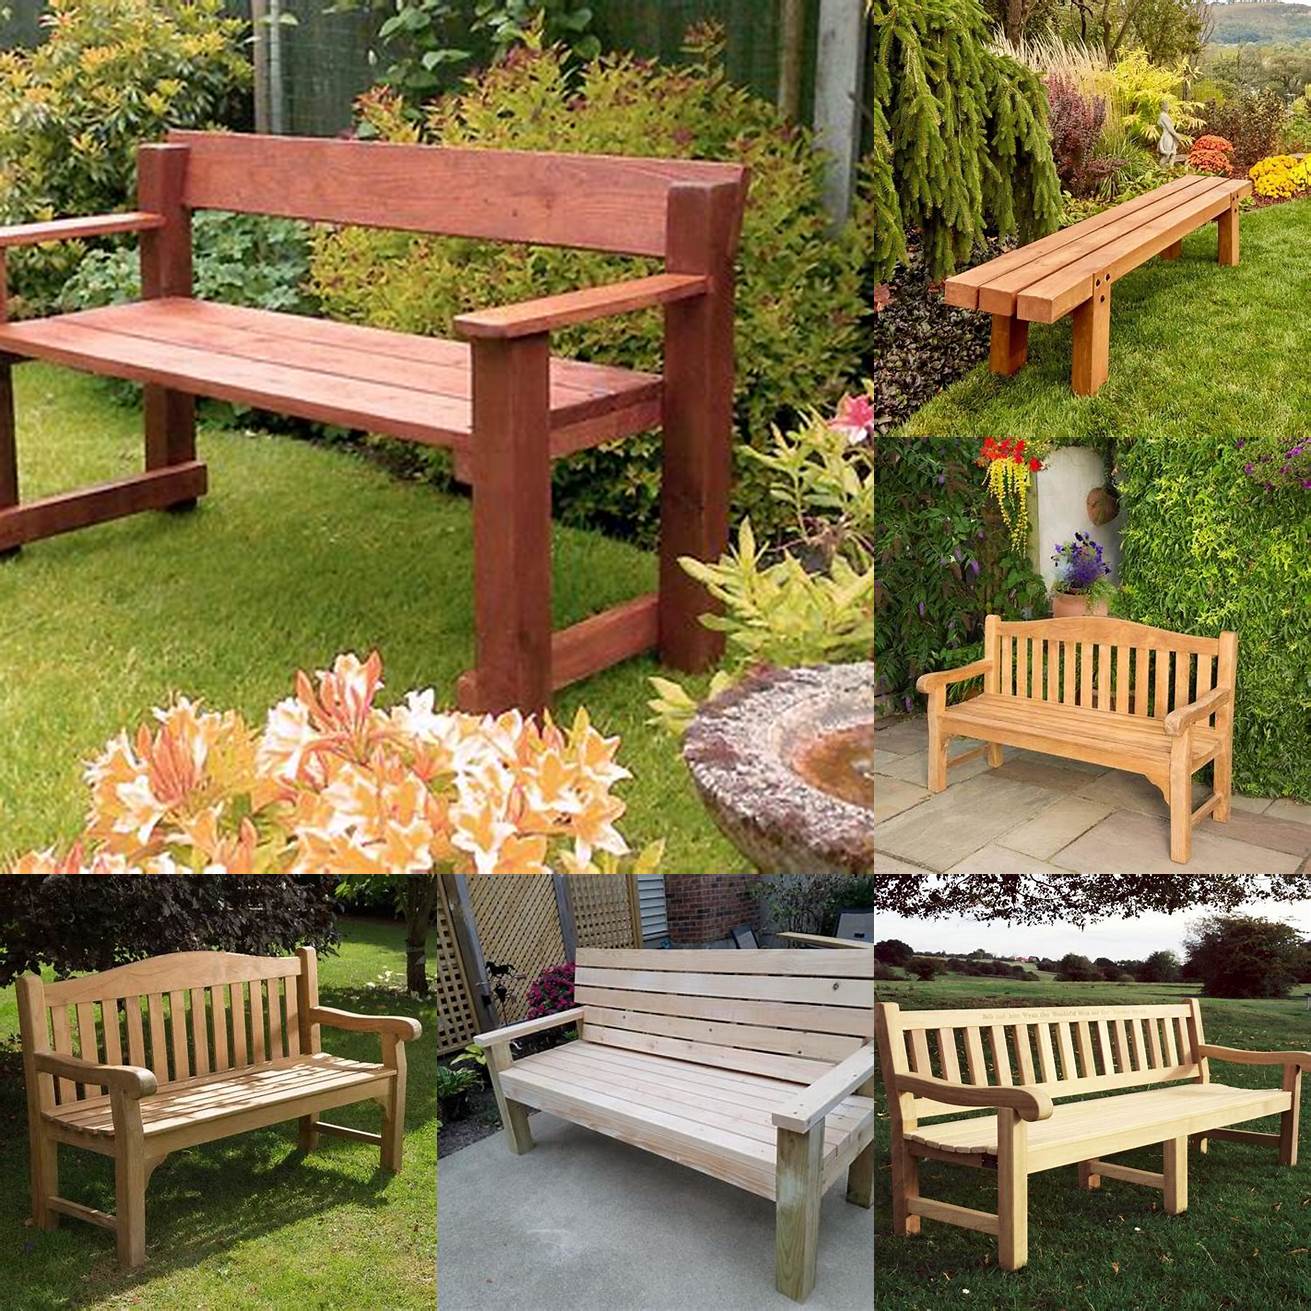 Quality Invest in a bench that is well-made sturdy and durable